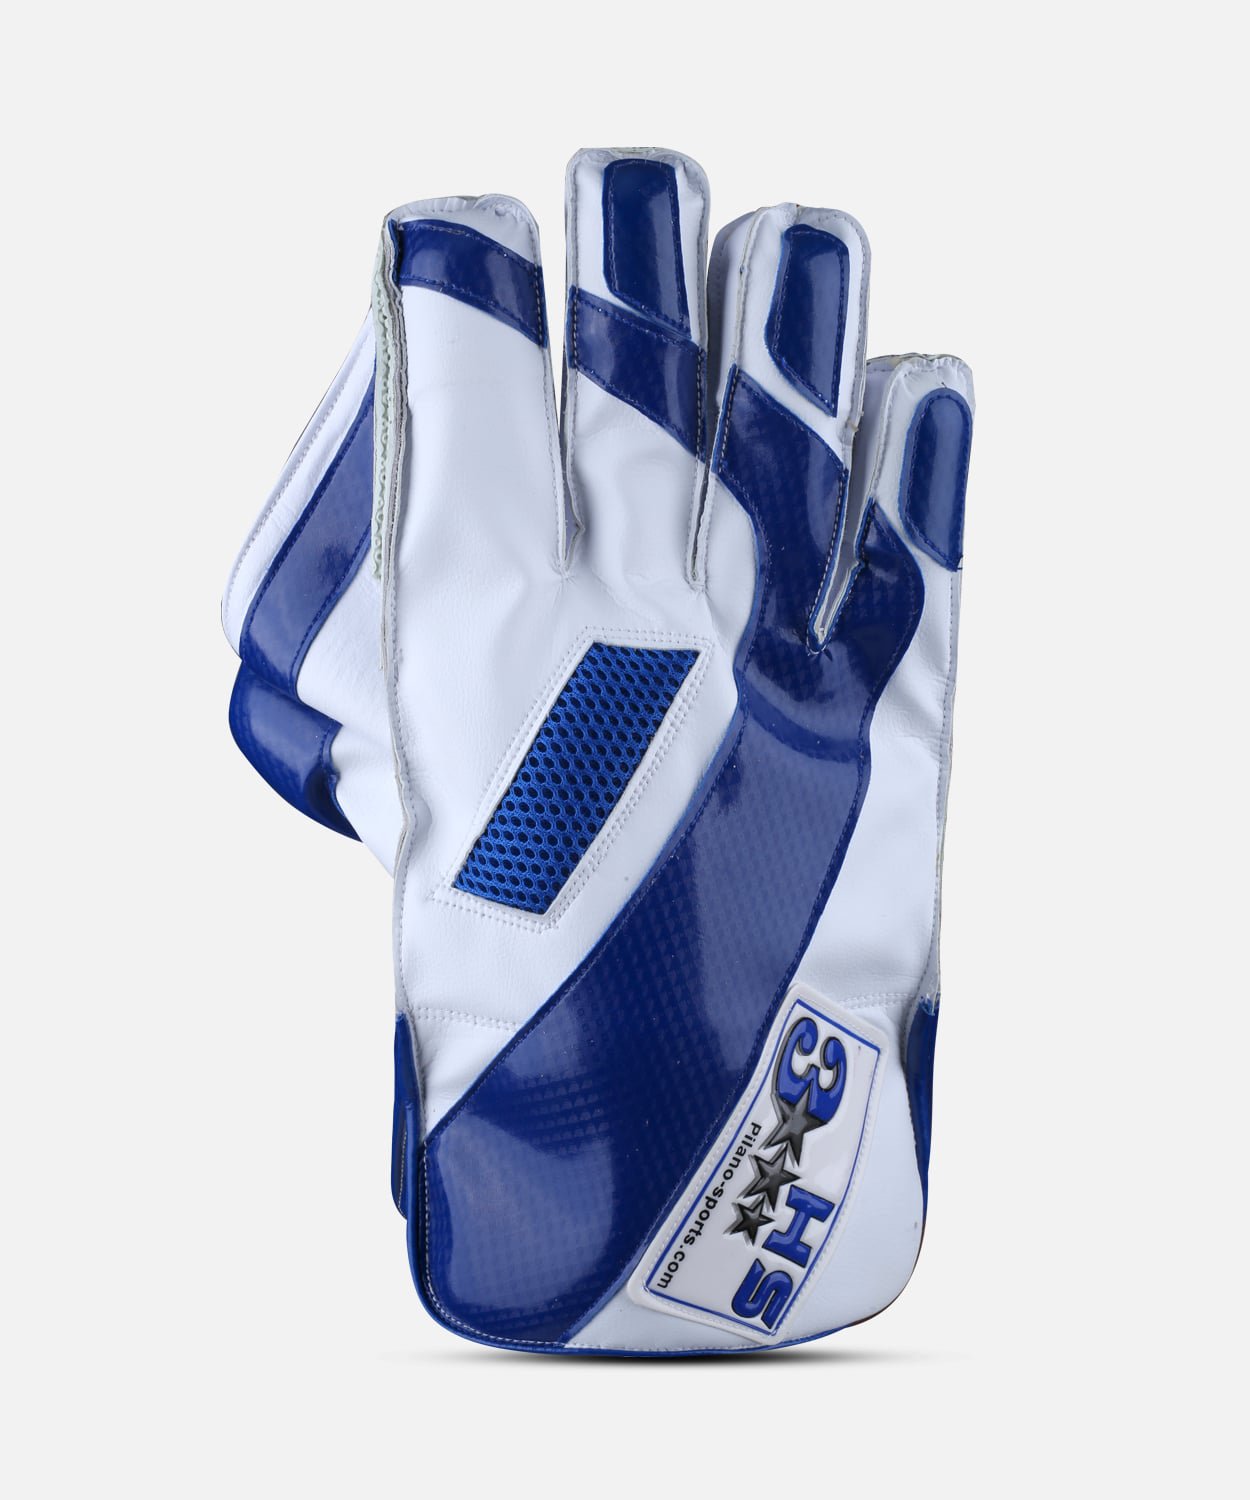 HS SPORTS 3 STAR HARD BALL CRICKET WICKET KEEPING GLOVES  (PLAYER EDITION)